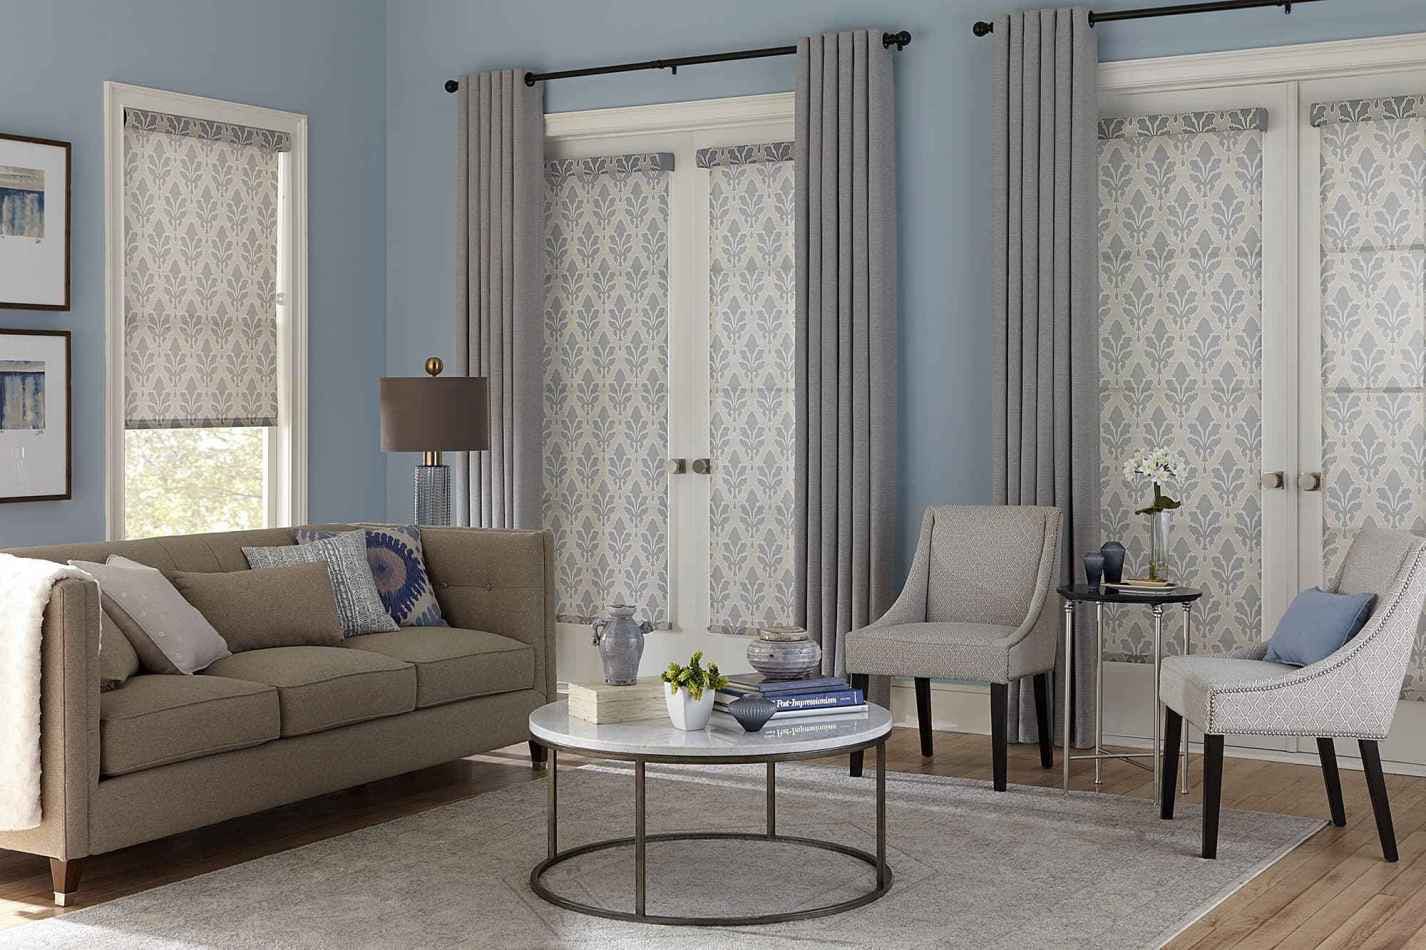 15+ Ideas to Dress Up Your French Windows and Doors (1)